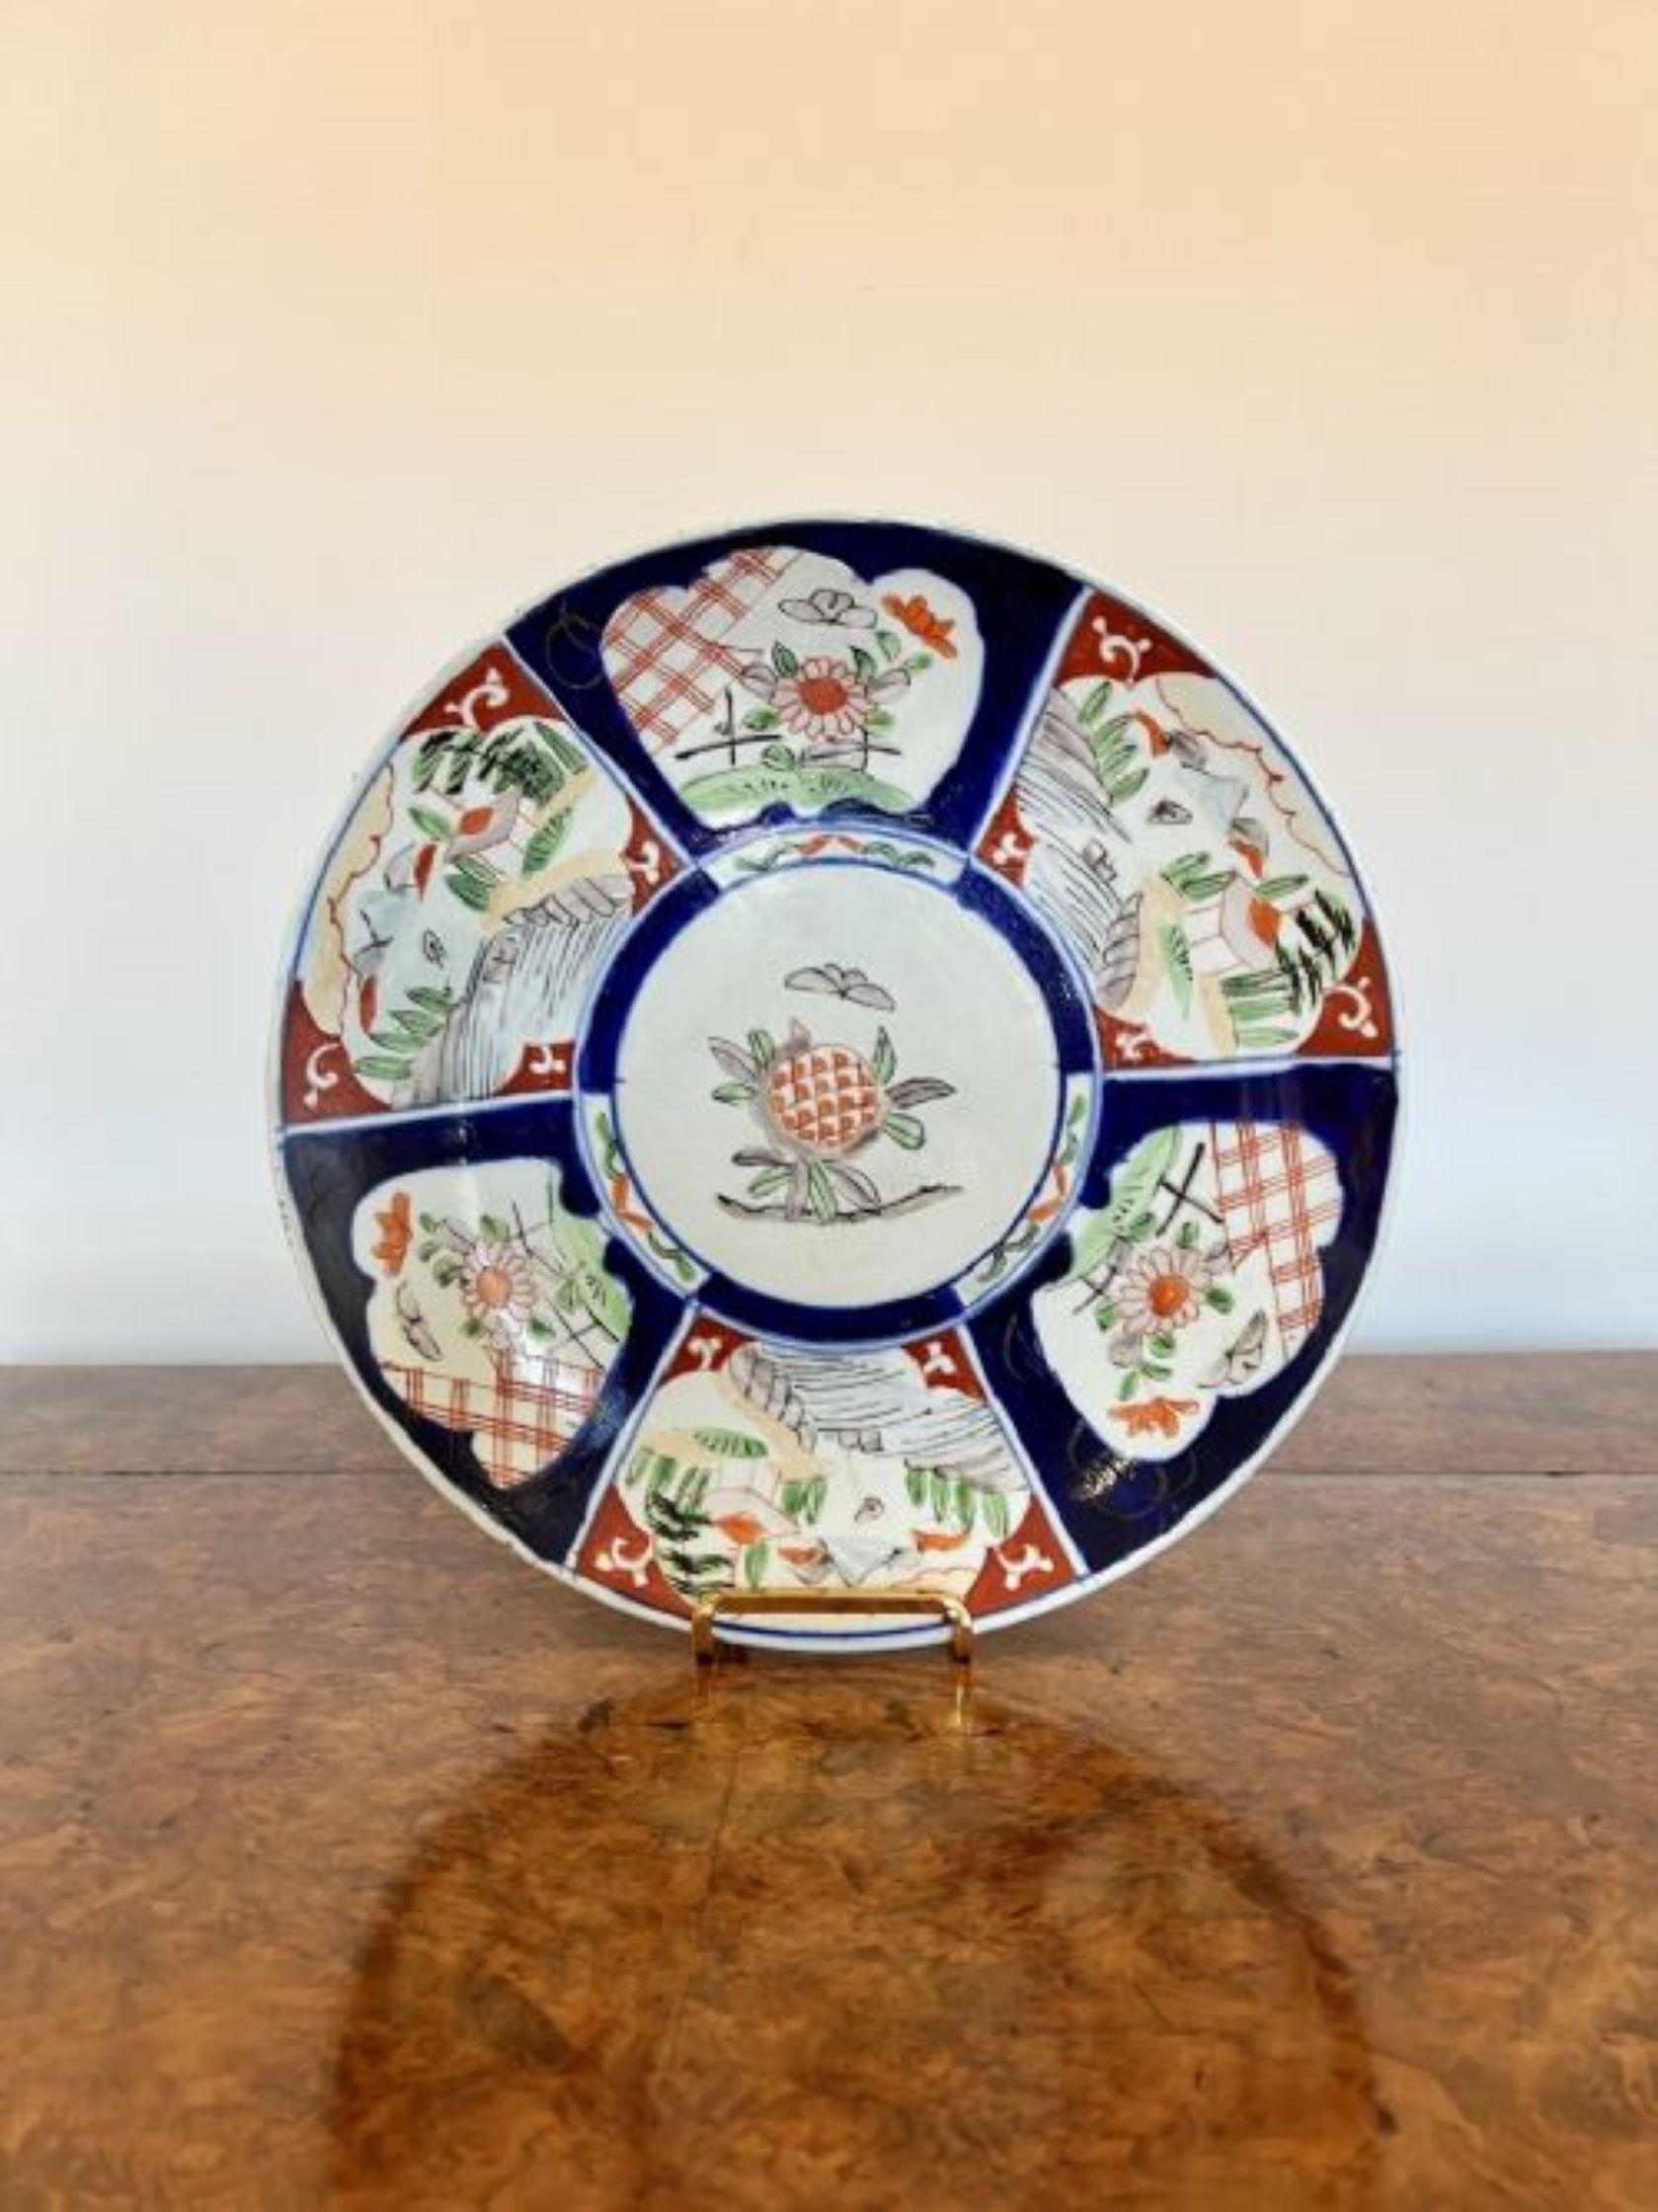 Quality pair of antique Japanese imari plates having a quality pair of imari chargers with wonderful decorated panels with flowers, leaves, trees and scenery hand painted in wonderful red, green, blue and white colours.